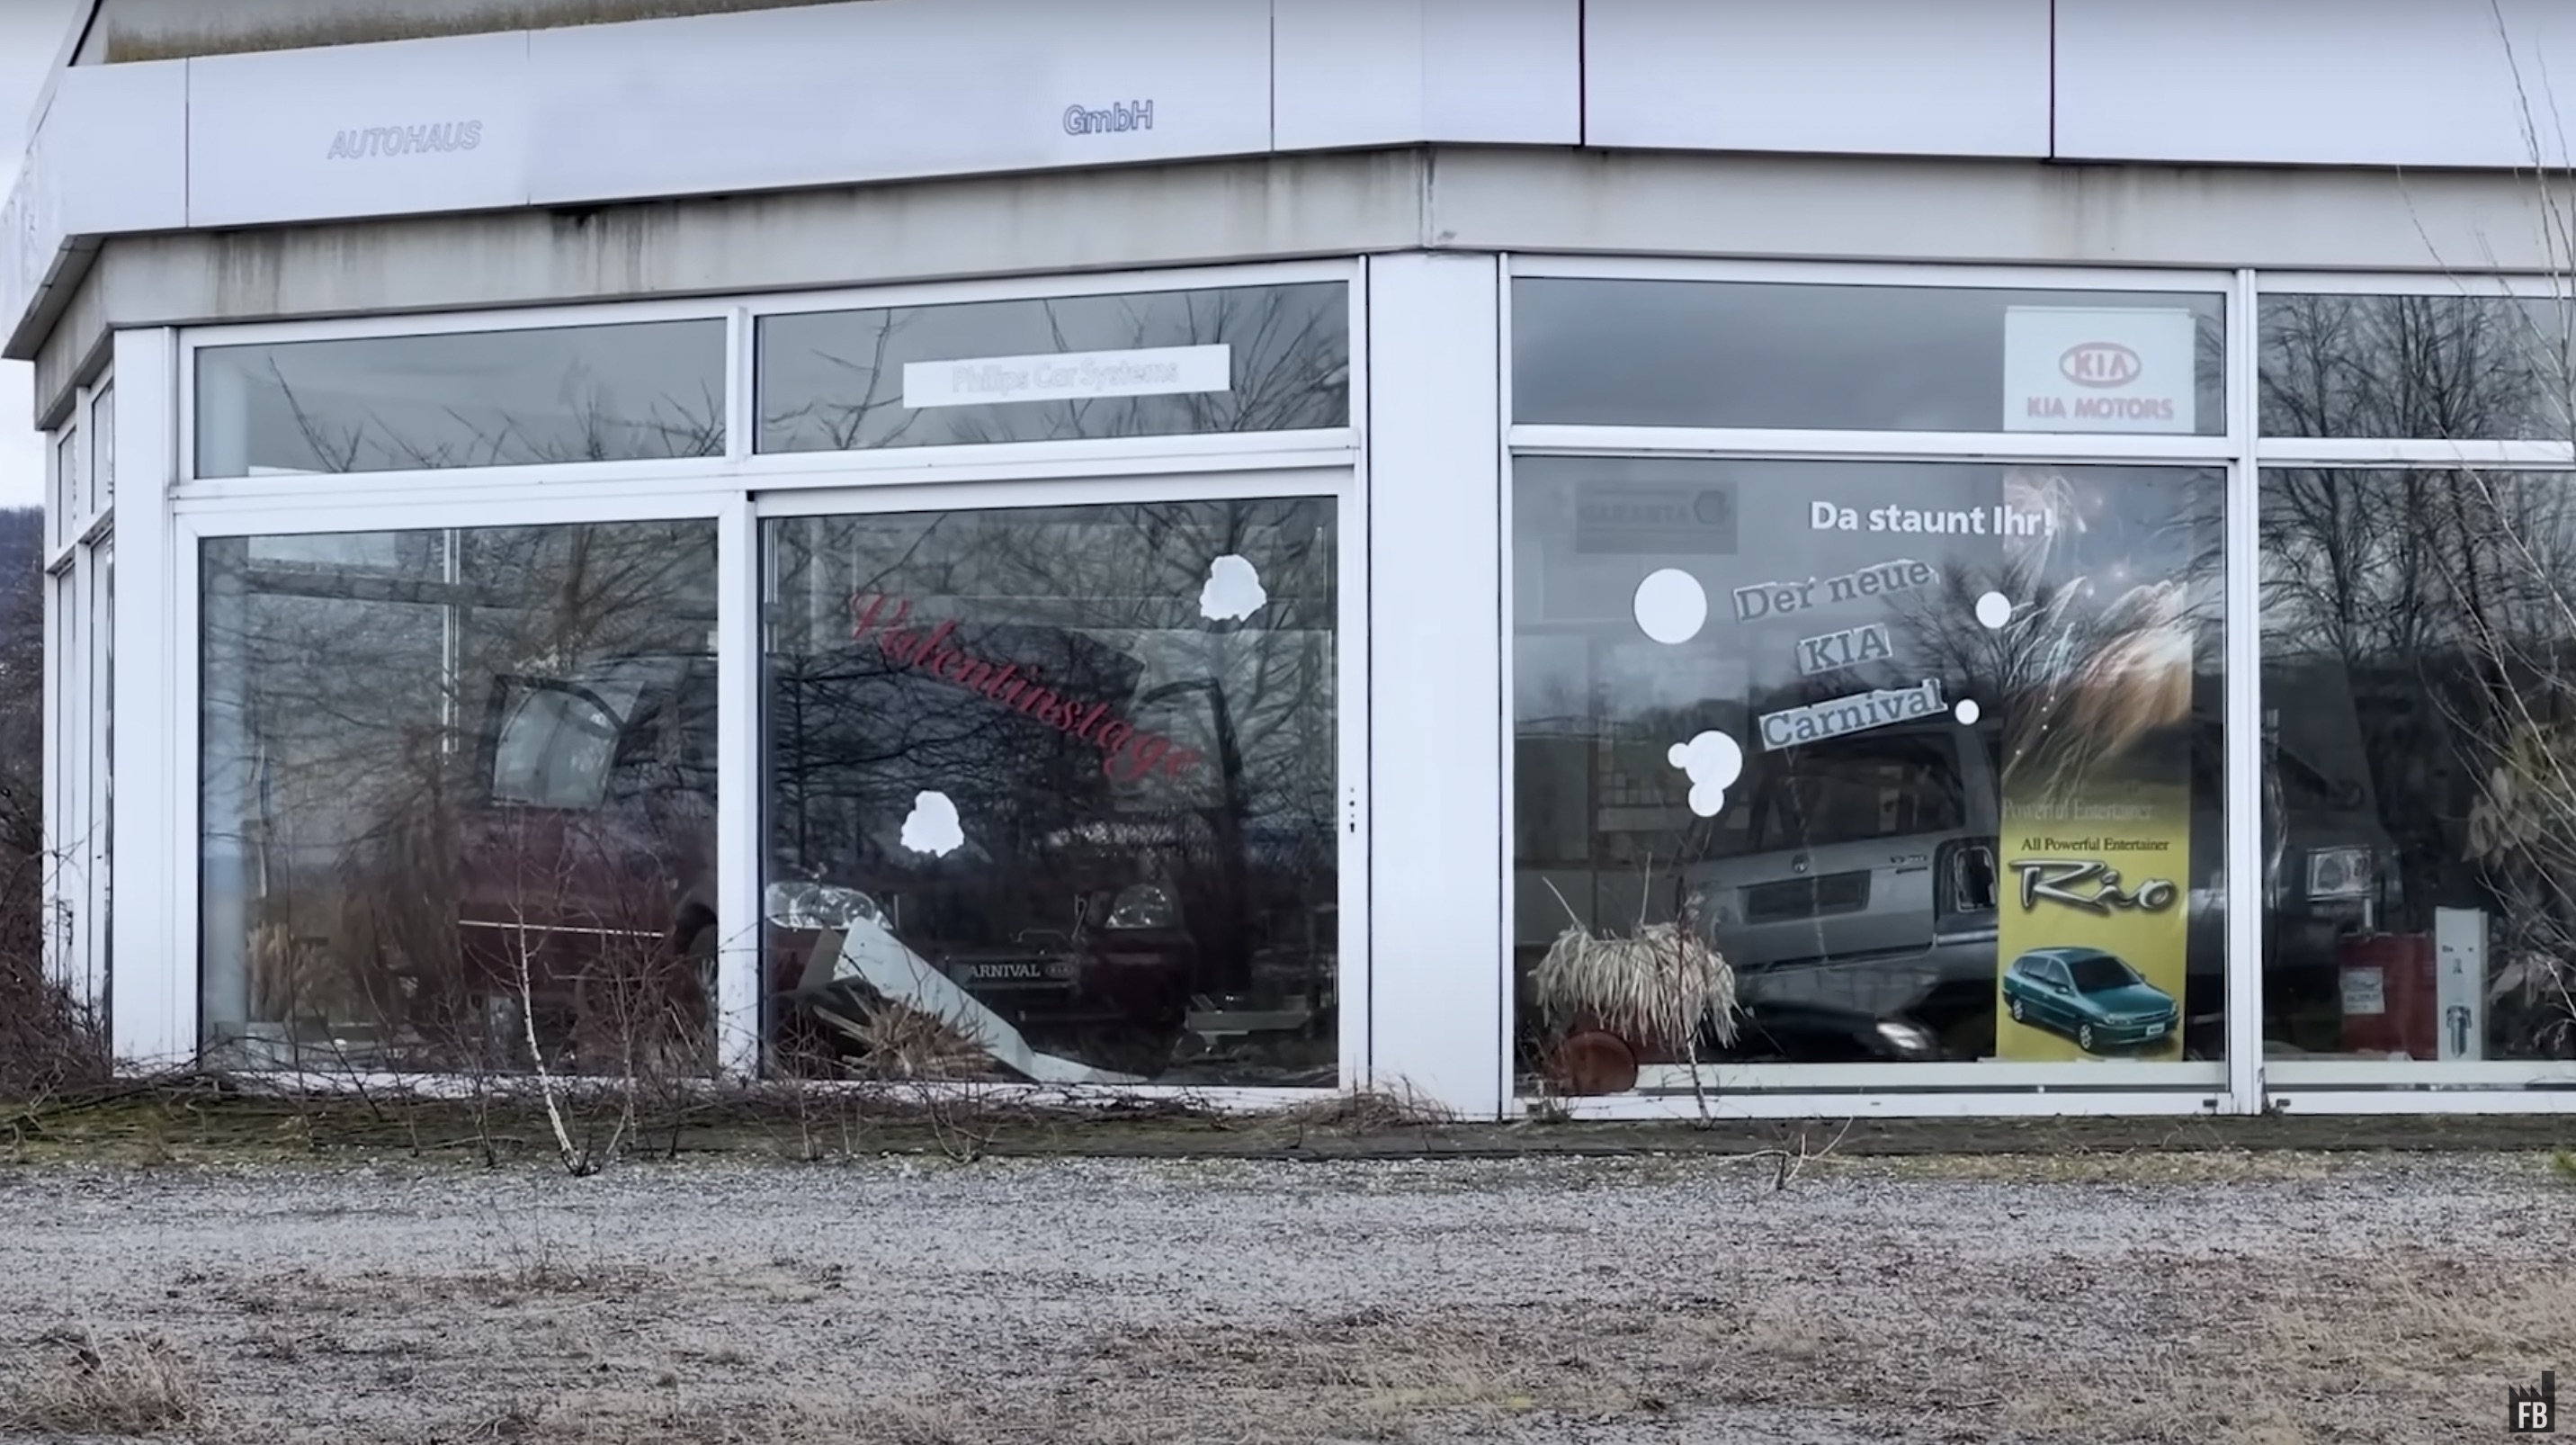 The family left thousands of euros worth of auto parts behind in the now-abandoned dealership